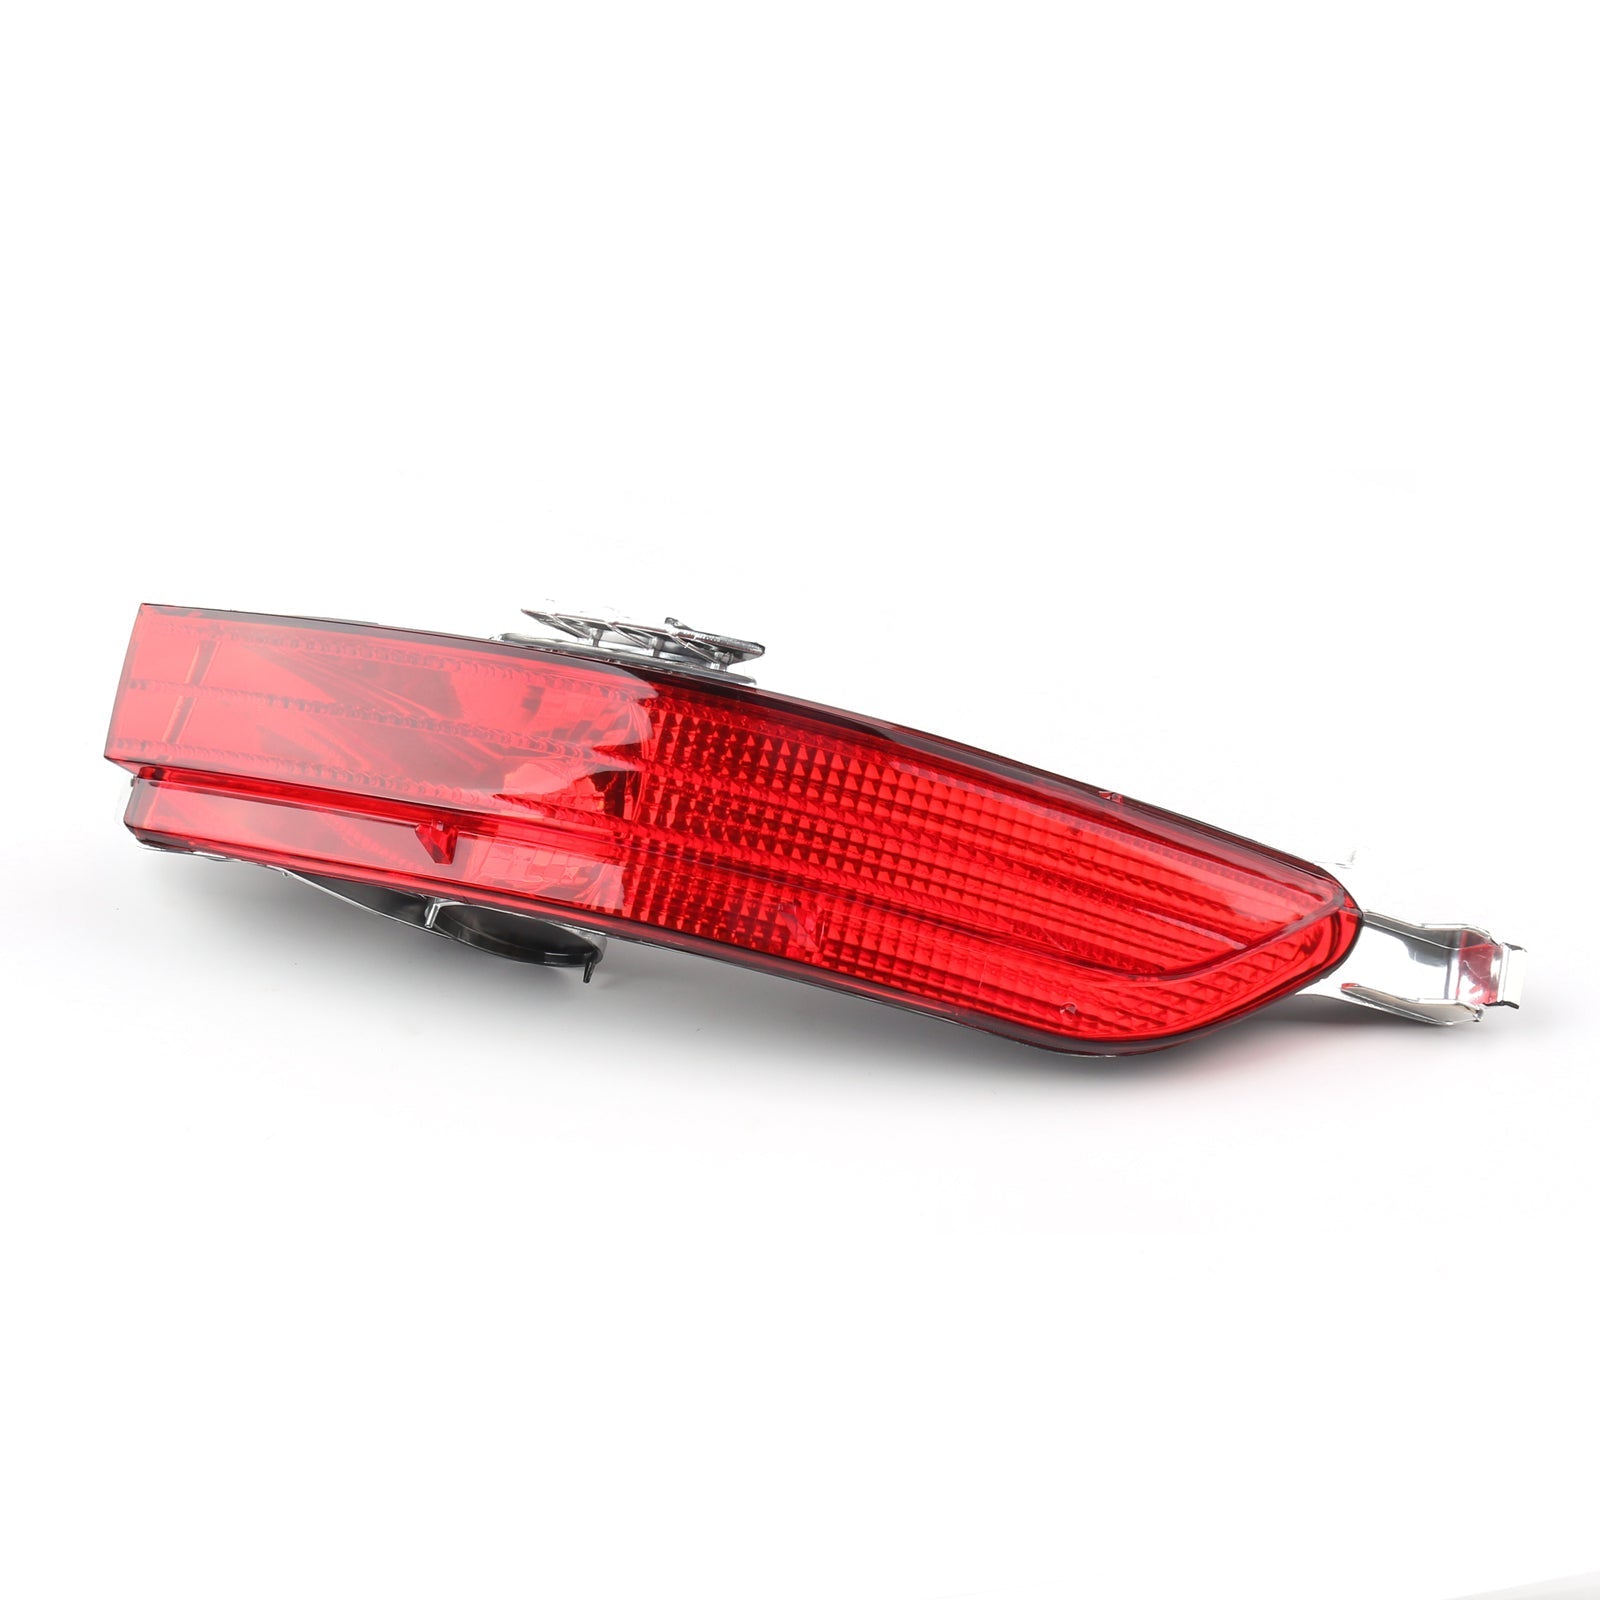 Right Red Rear Fog Lamp Bumper Cover Reflector For VW Touareg 211-214